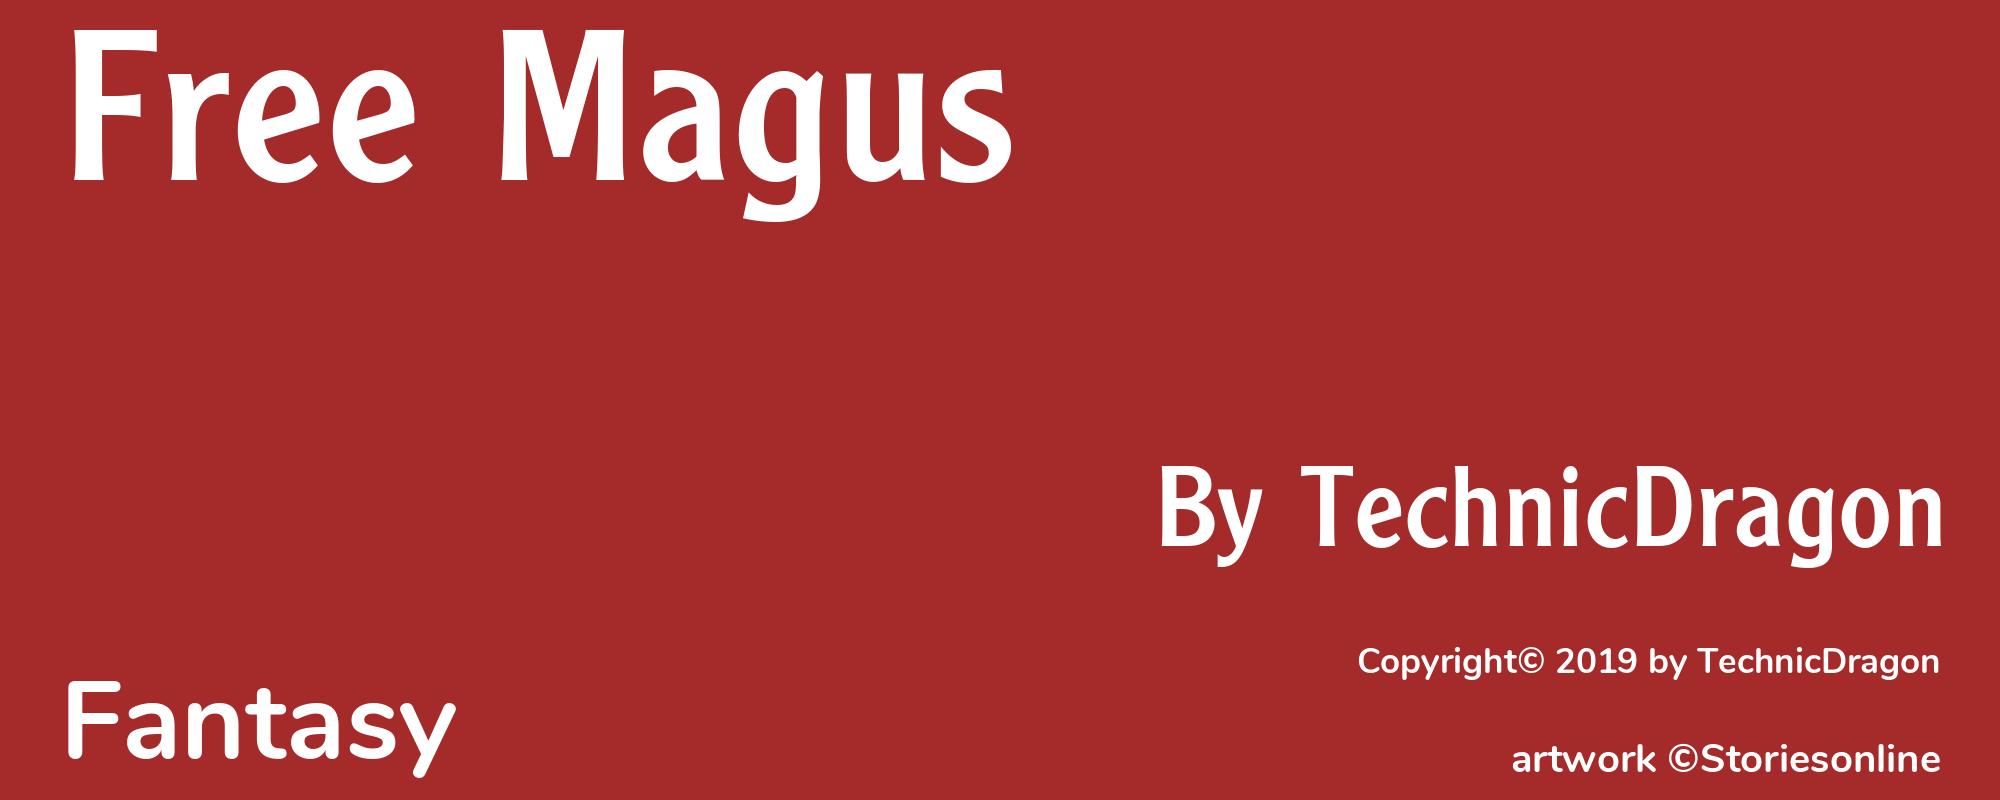 Free Magus - Cover